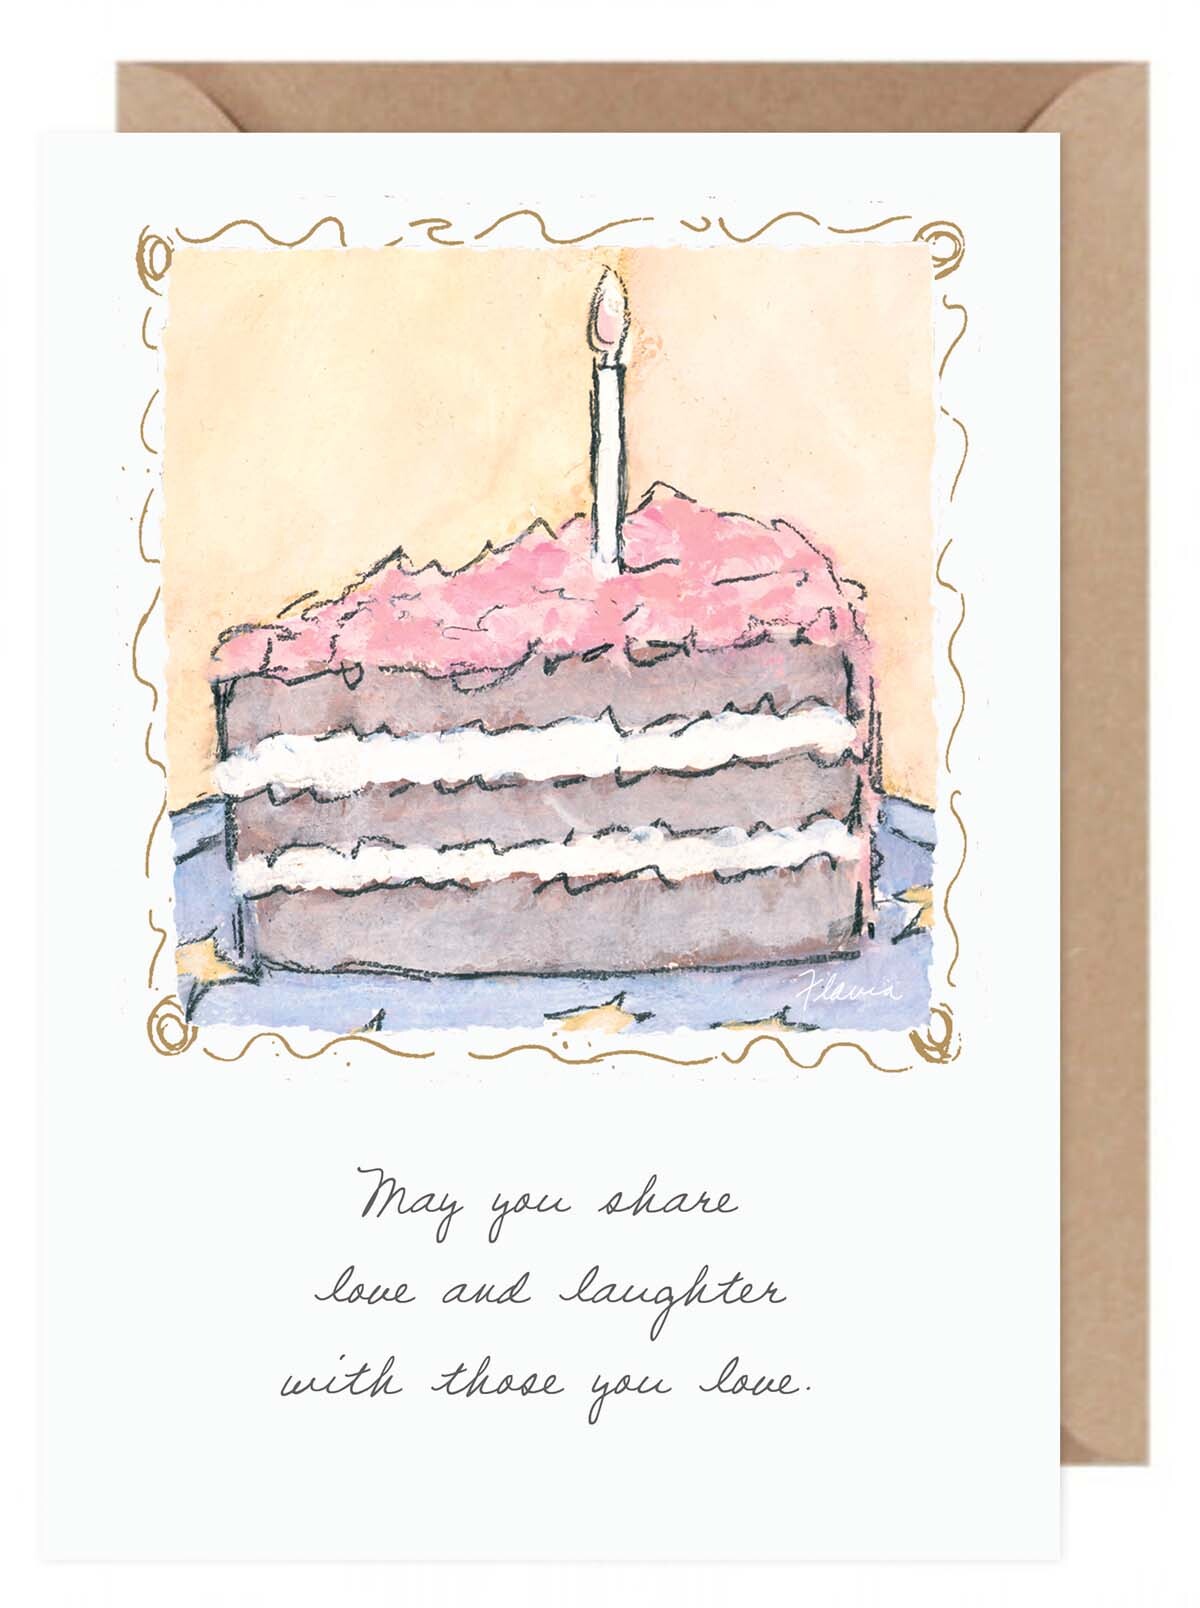 Sharing Love and Laughter - a Flavia Weedn inspirational greeting card  0003-2073